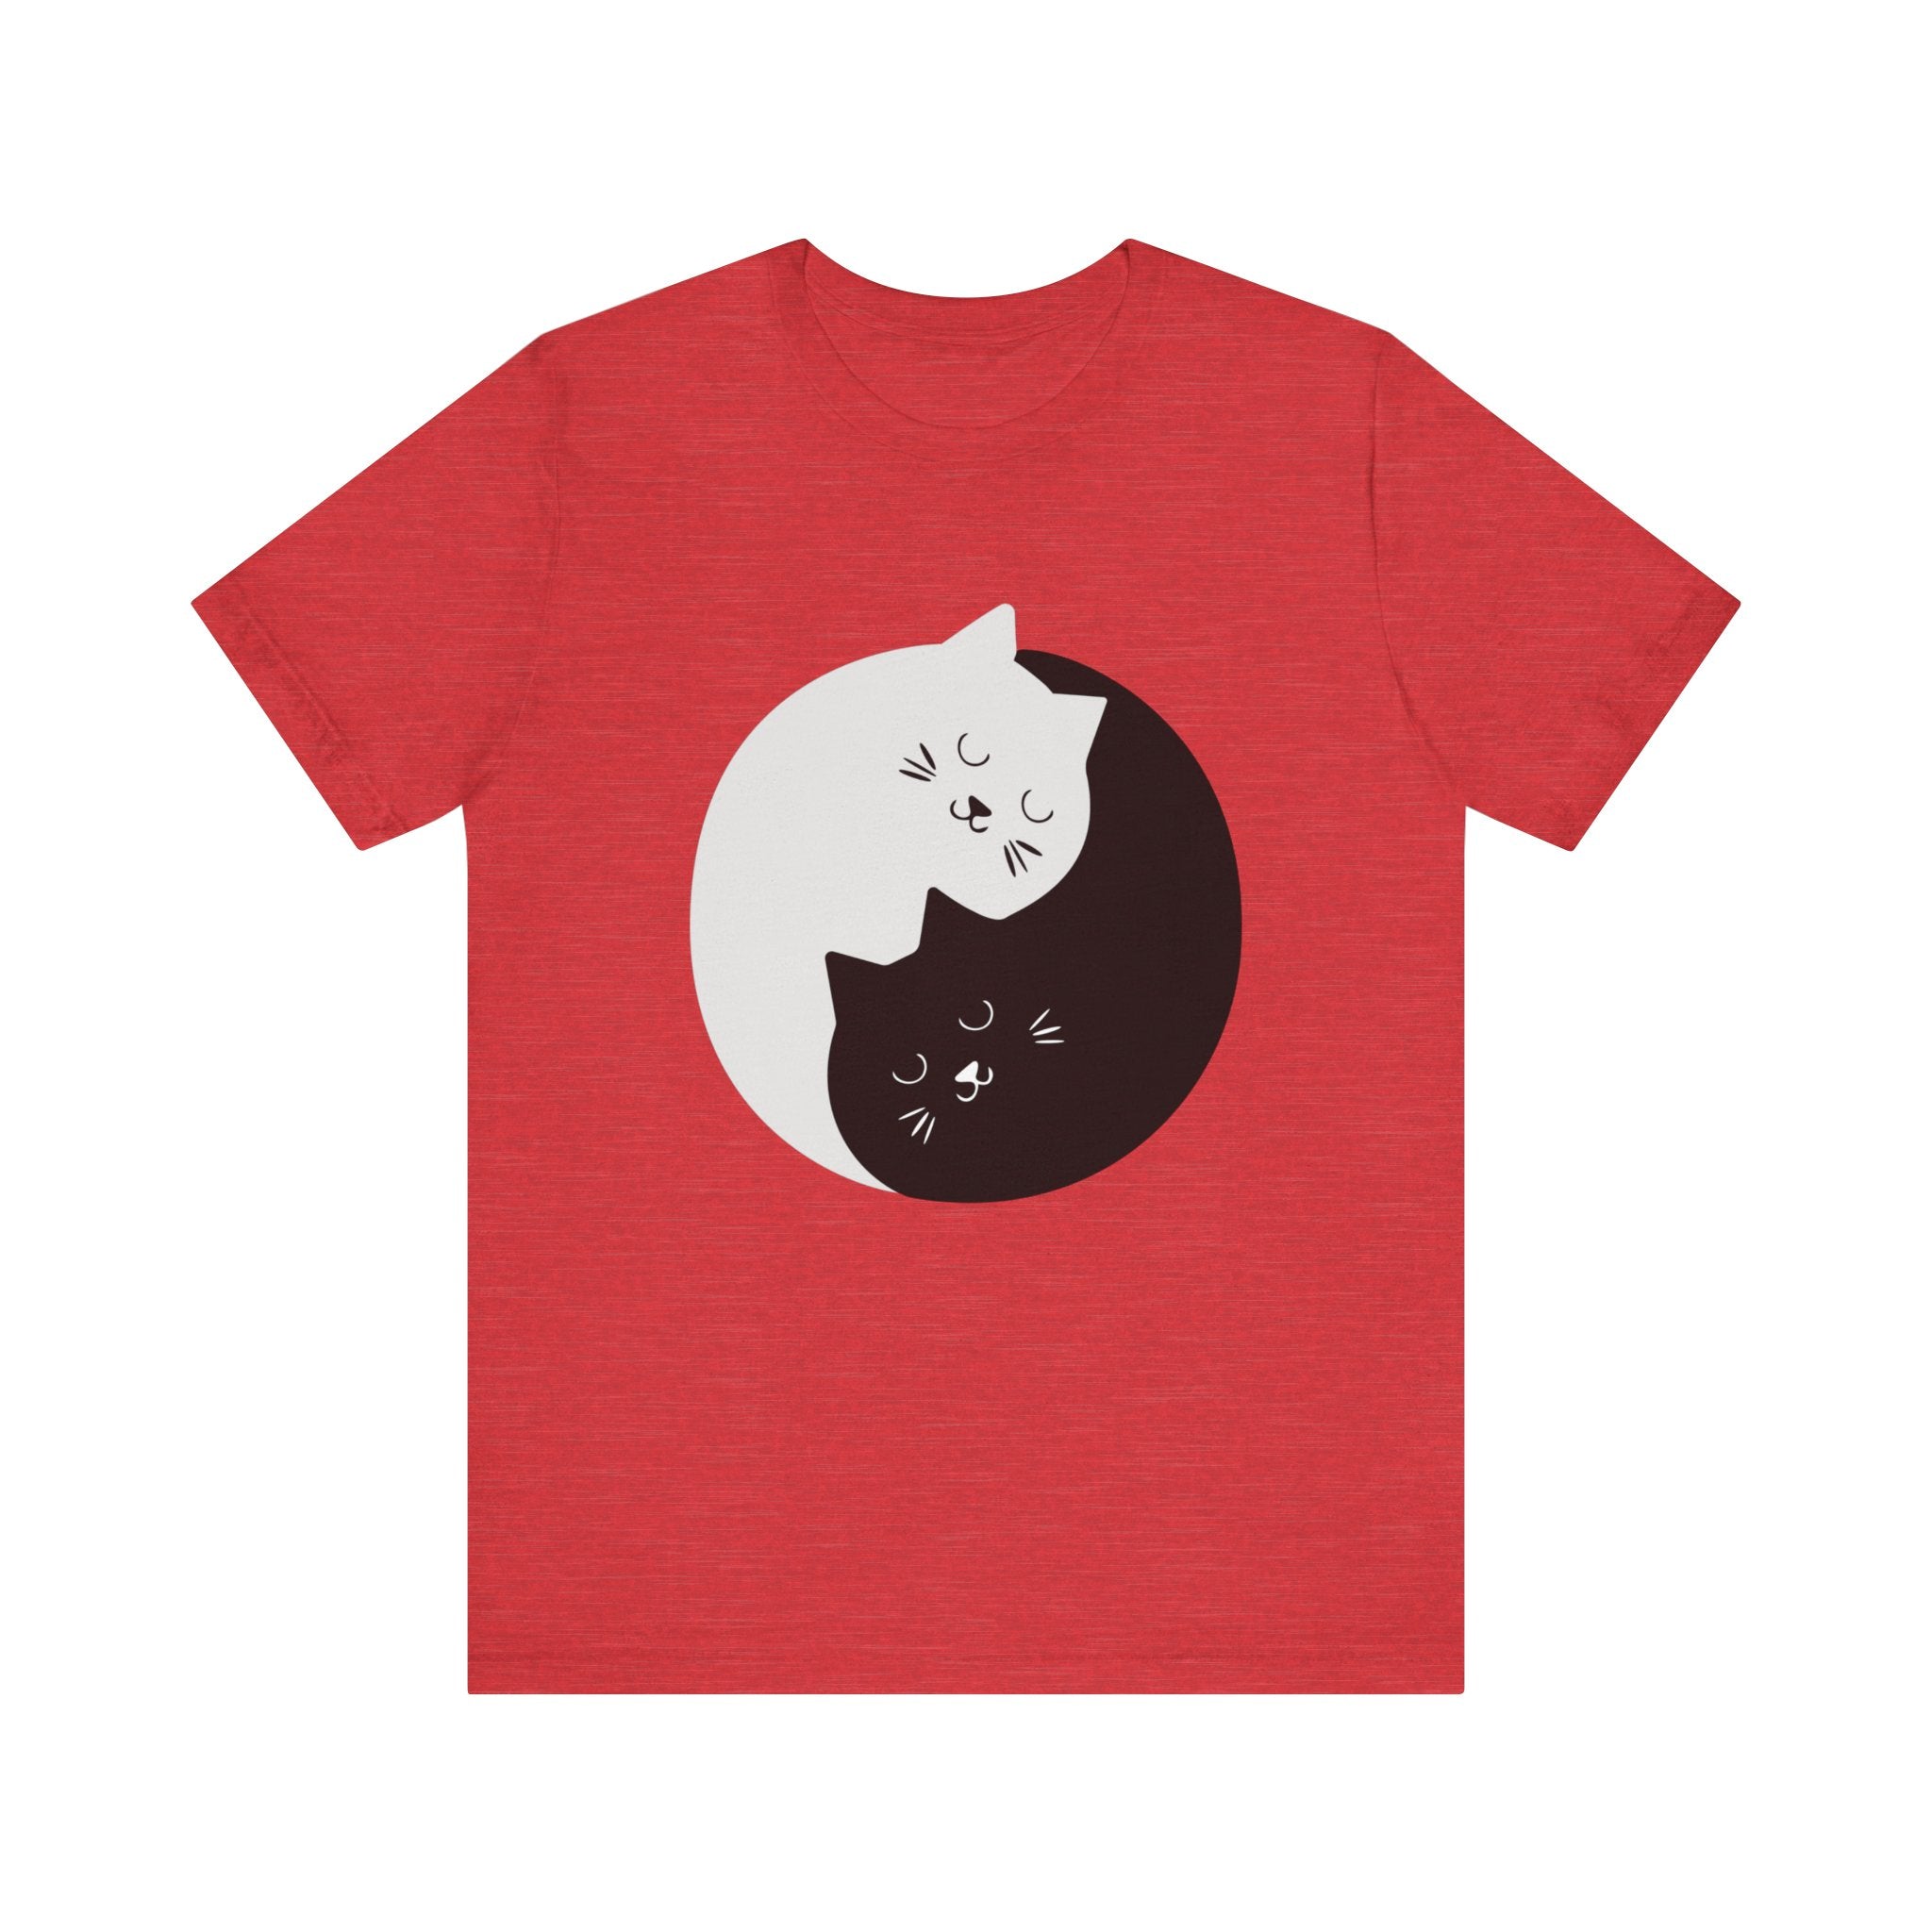 Unisex tee featuring a graphic of YING-ANG KITTIES curled up together to form a Ying & Yang symbol.